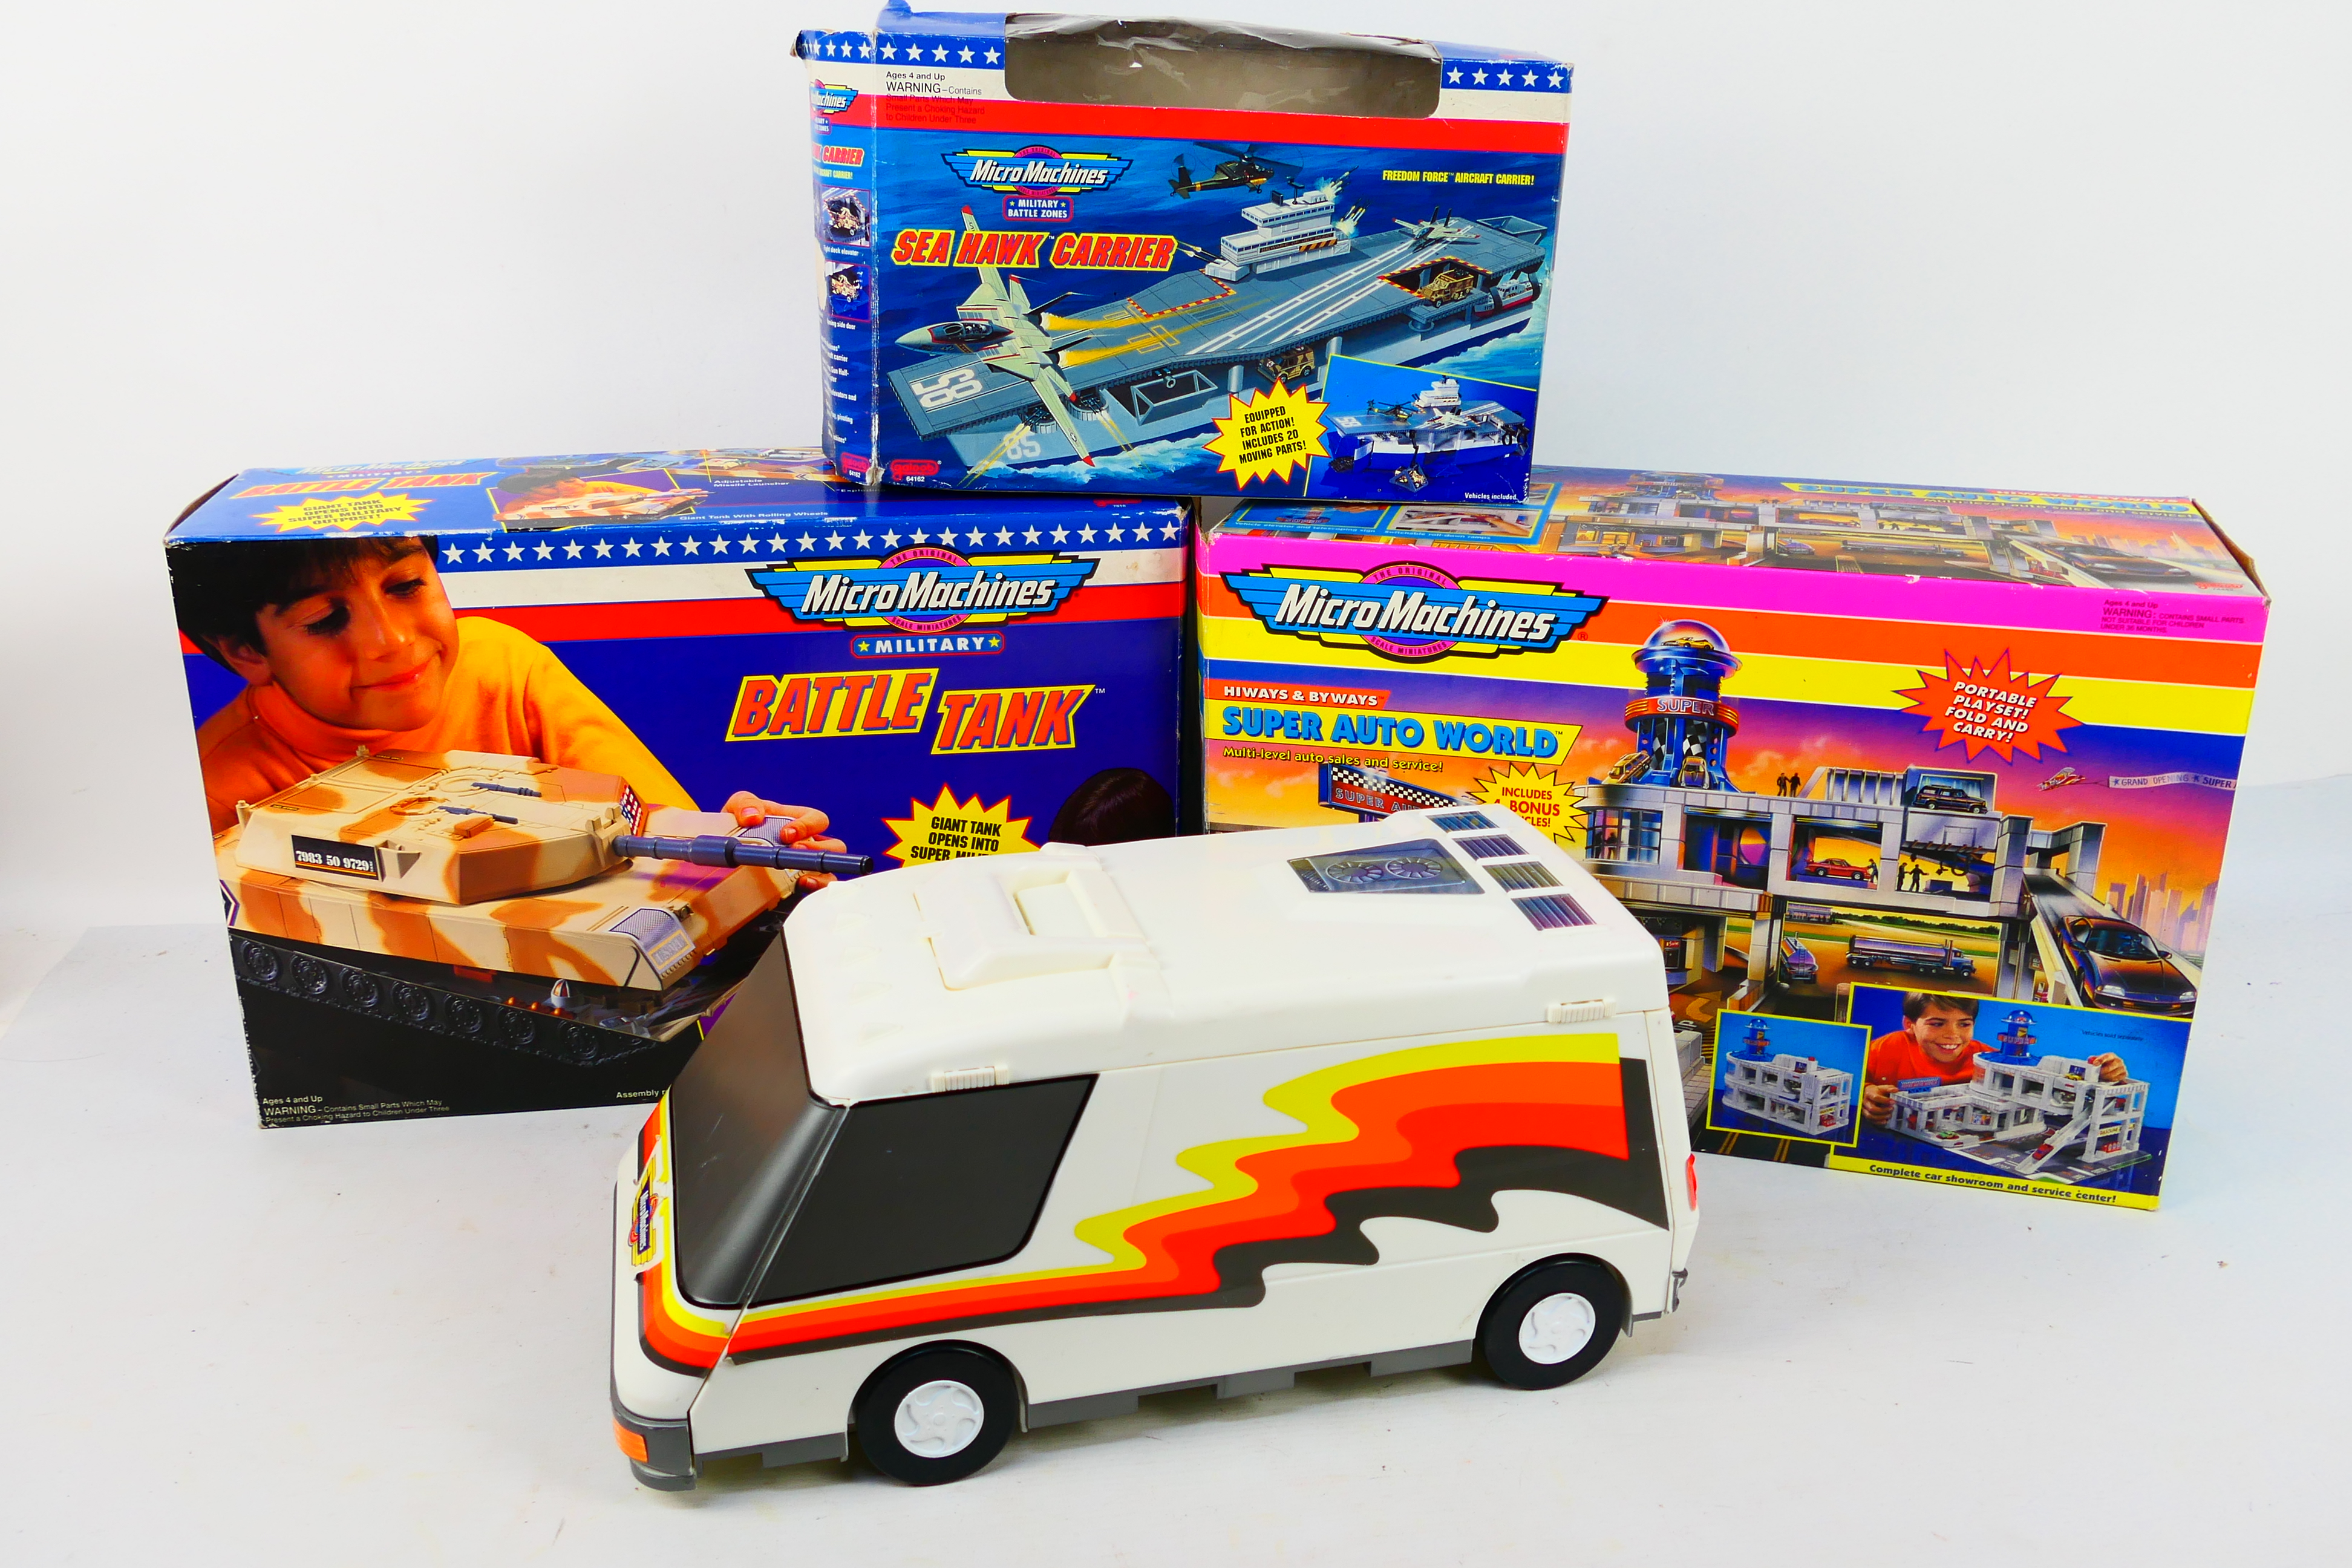 Galoob - Micro Machines. Three boxed Micro Machines playsets and One loose set.